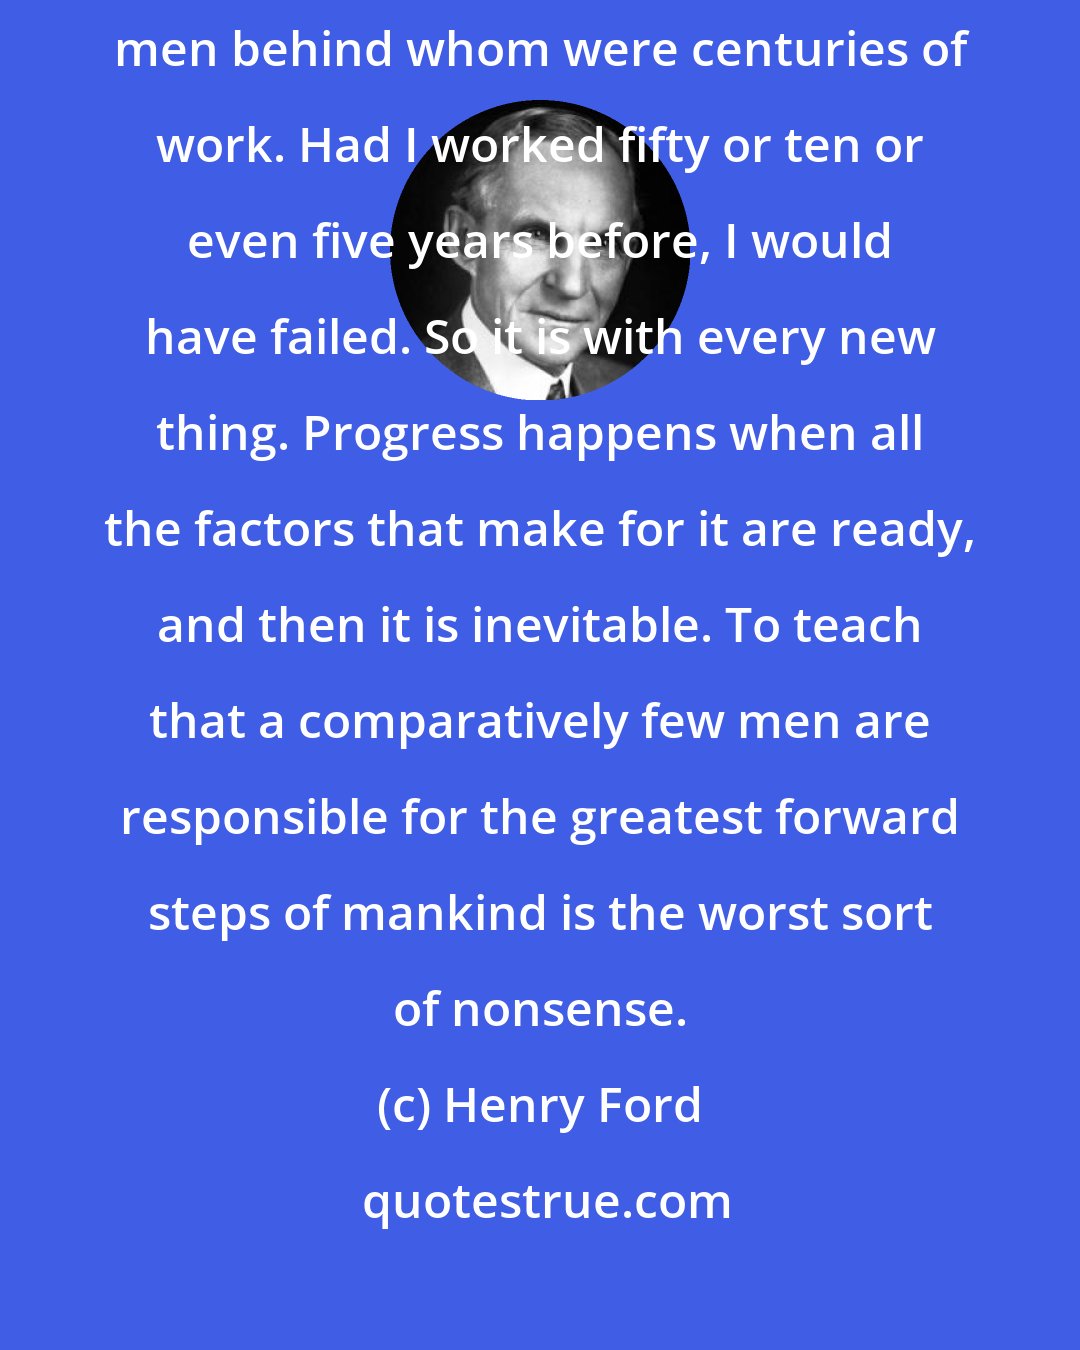 Henry Ford: I invented nothing new. I simply assembled the discoveries of other men behind whom were centuries of work. Had I worked fifty or ten or even five years before, I would have failed. So it is with every new thing. Progress happens when all the factors that make for it are ready, and then it is inevitable. To teach that a comparatively few men are responsible for the greatest forward steps of mankind is the worst sort of nonsense.